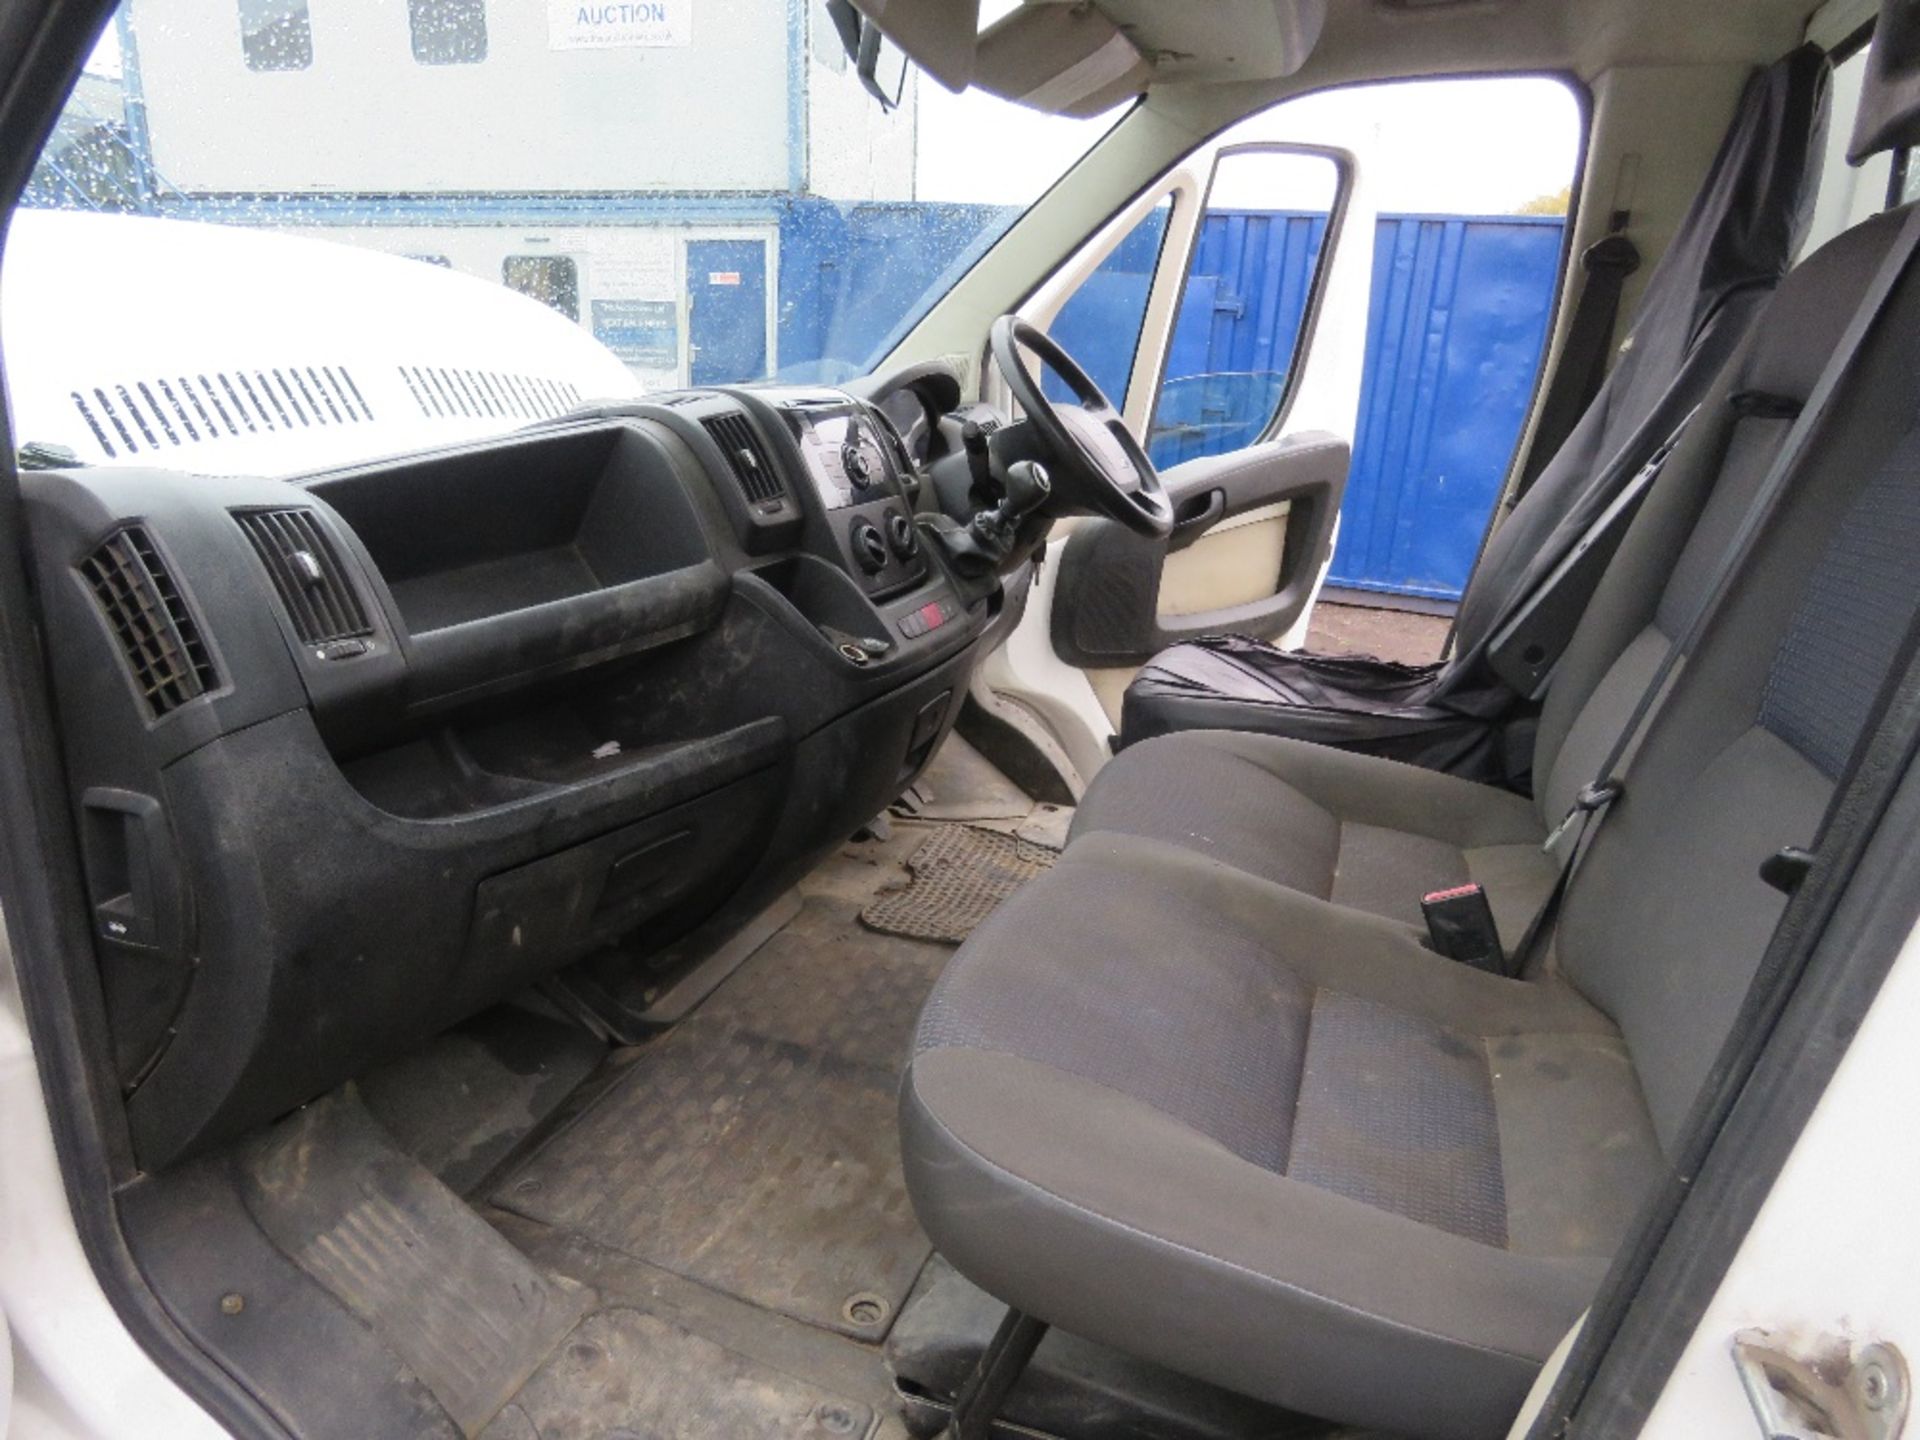 CITROEN LOW BED PLANT TRUCK, REG:BX14 OVP. 3500KG RATED WITH RAMPS. 125,870 REC MILES. WITH V5, MOT - Image 6 of 13